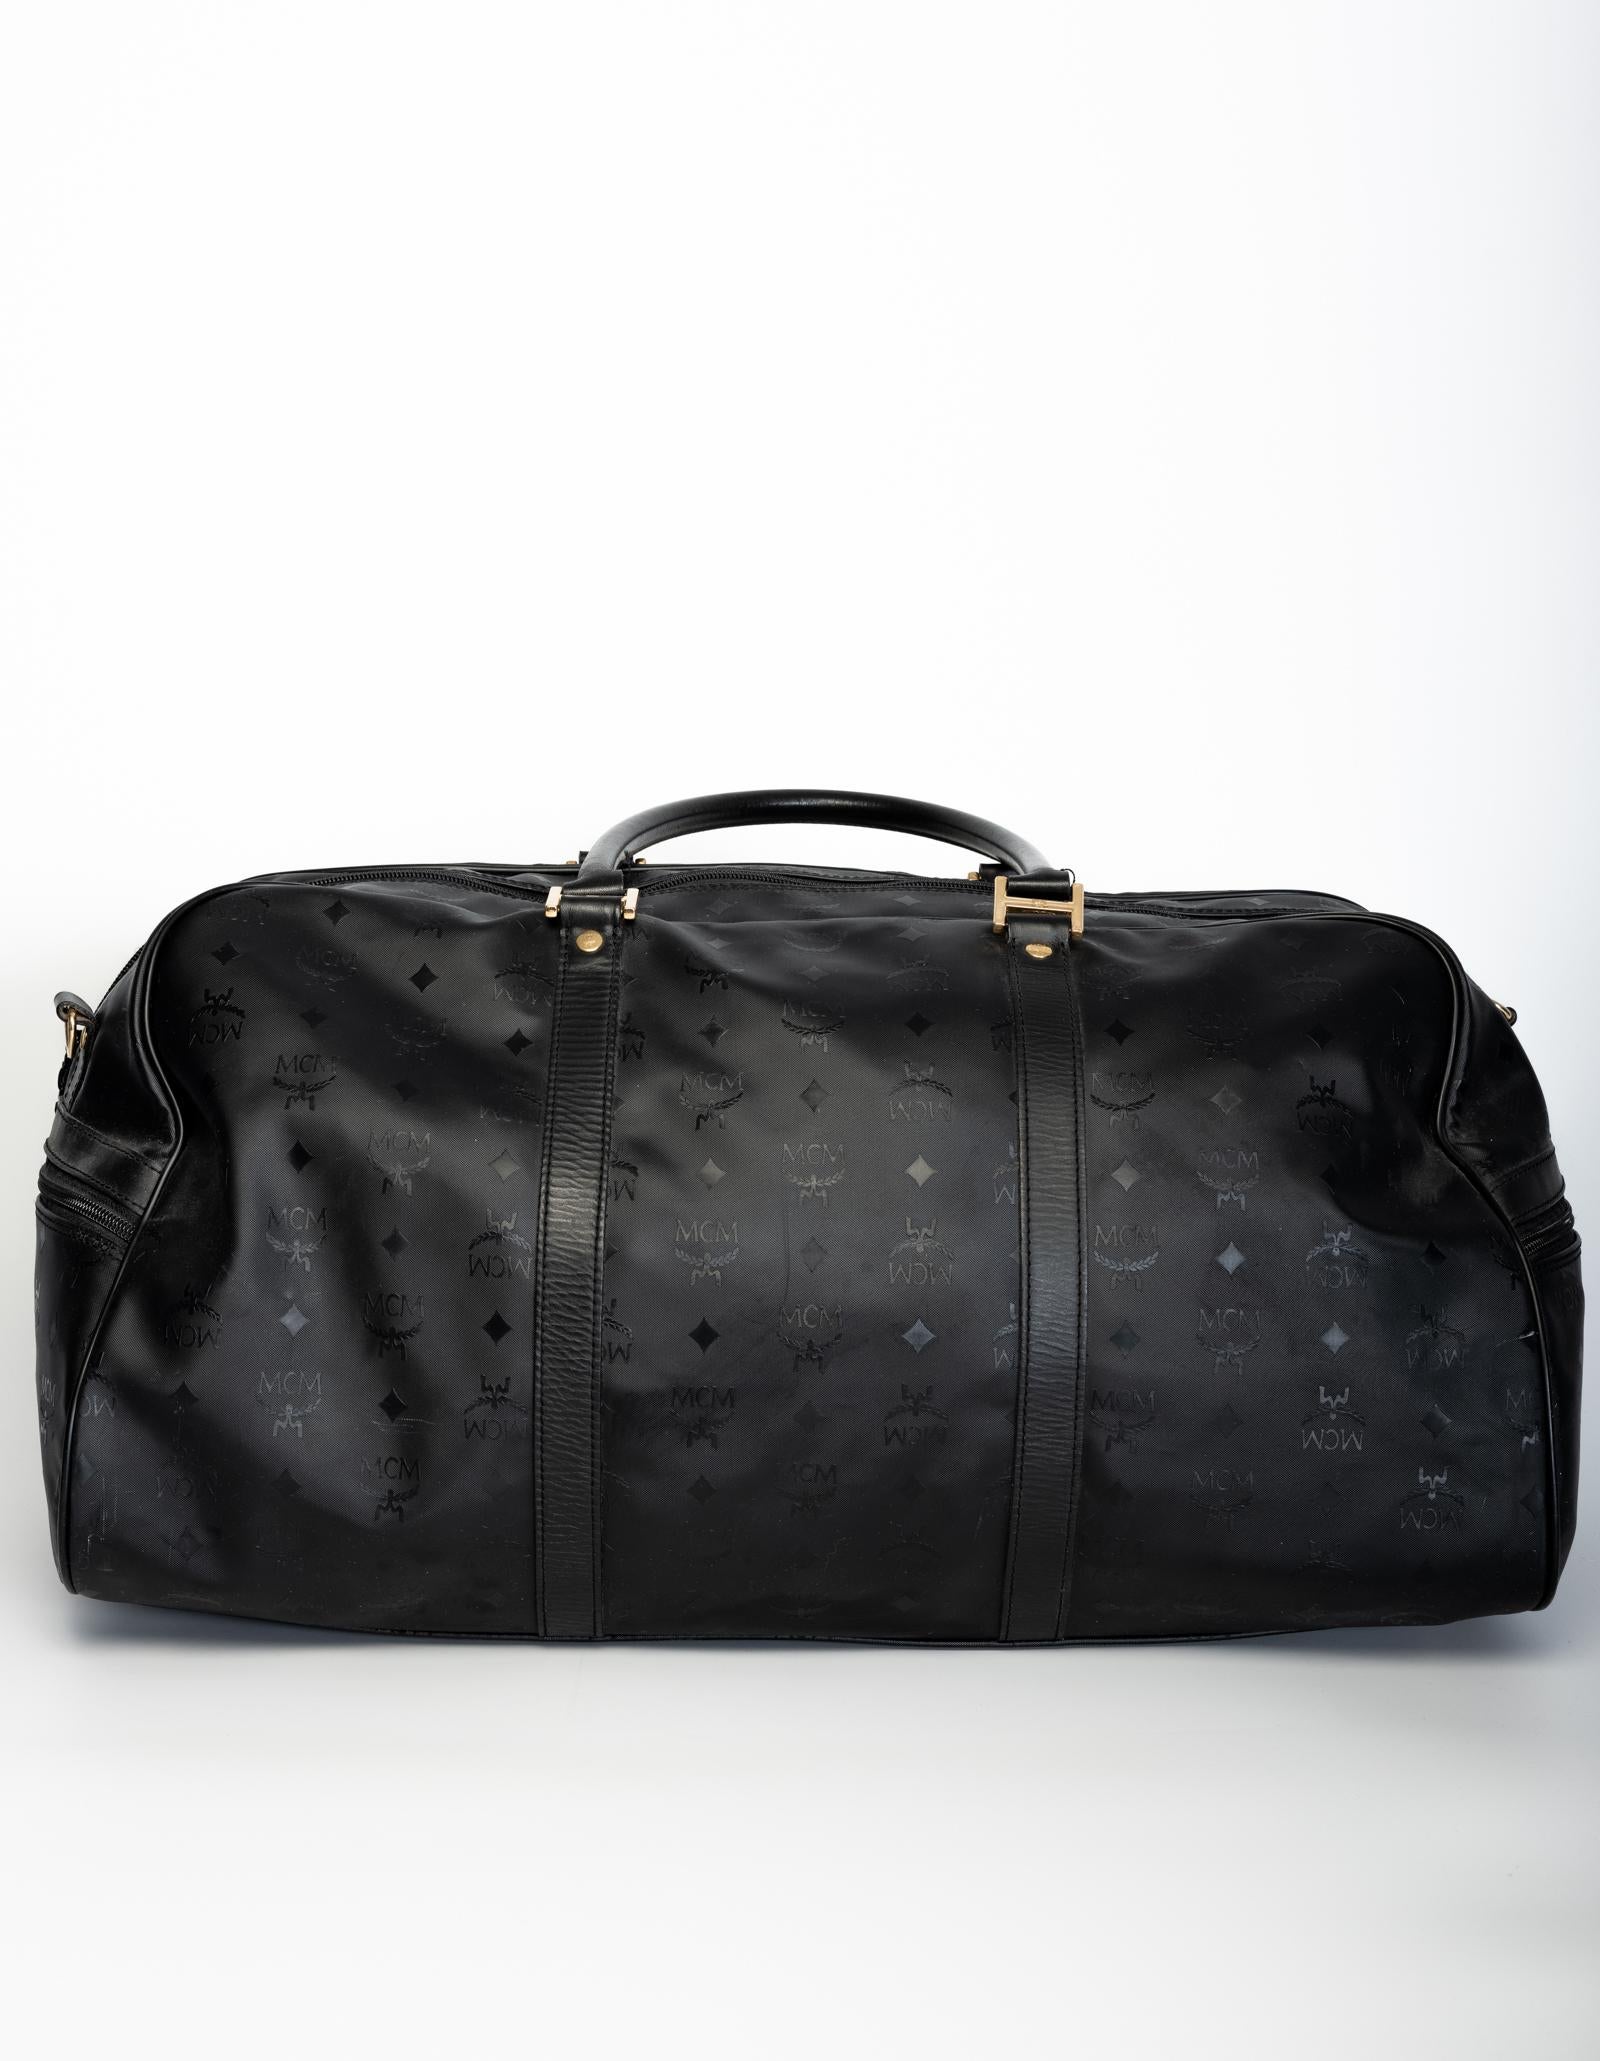 This MCM duffel bag is made of sturdy water resistant black nylon and features dual rolled leather top handles, a detachable shoulder strap, gold tone hardware, two exterior zipper pockets, an interior zipper pocket, and black woven monogram